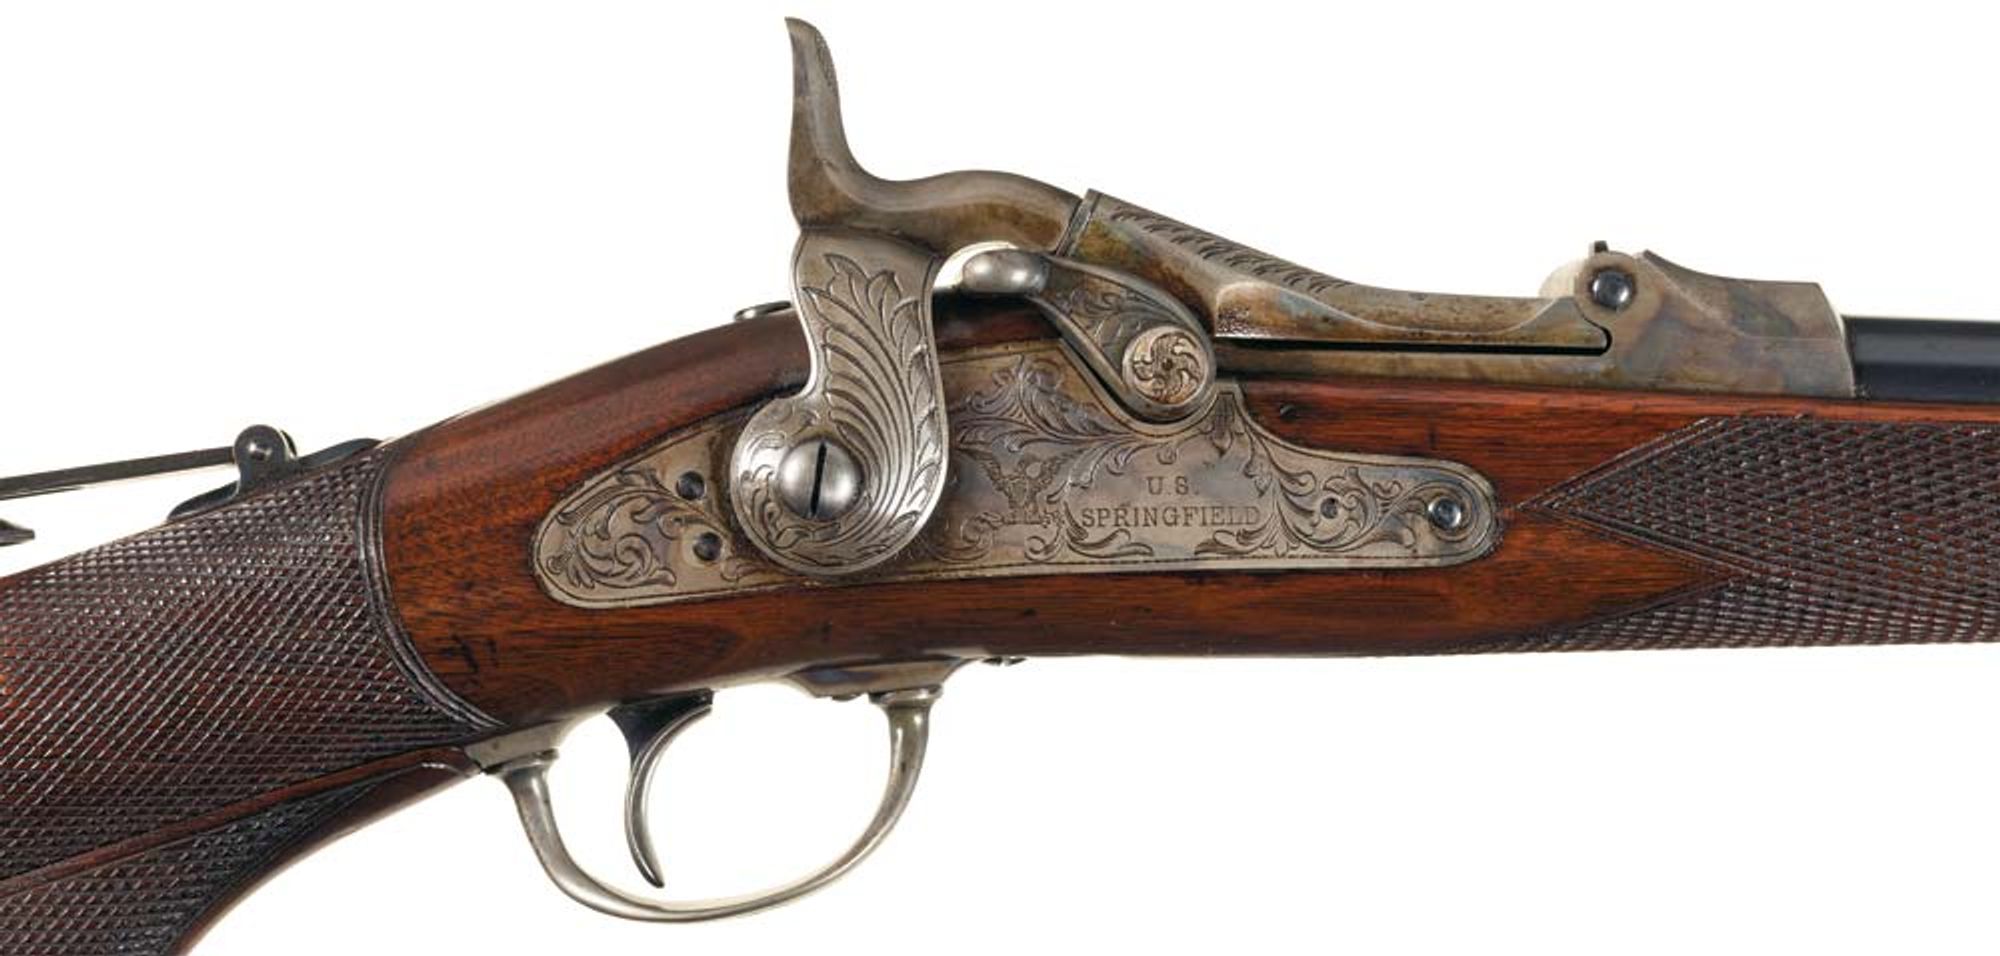 Lot 1476: Rare U.S. Springfield Armory Model 1875 Officer's Model Trapdoor Rifle, Late Type II